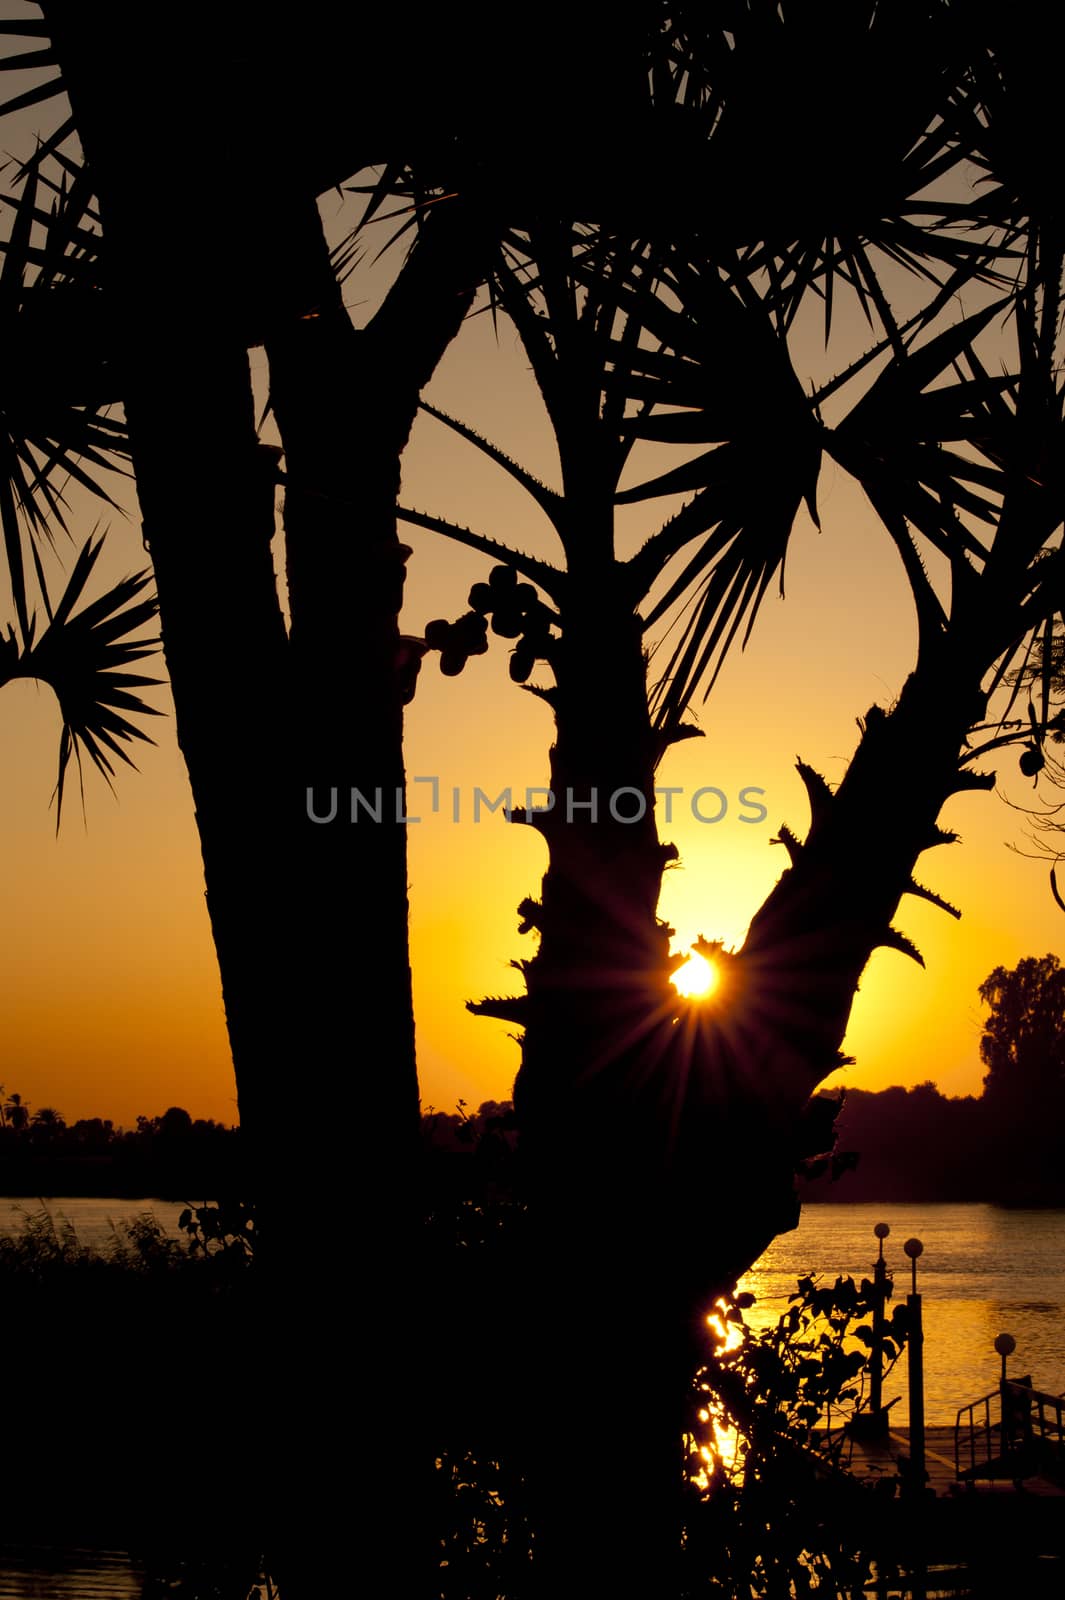 An orange sunset through the branches of tropical palm trees with river in the background